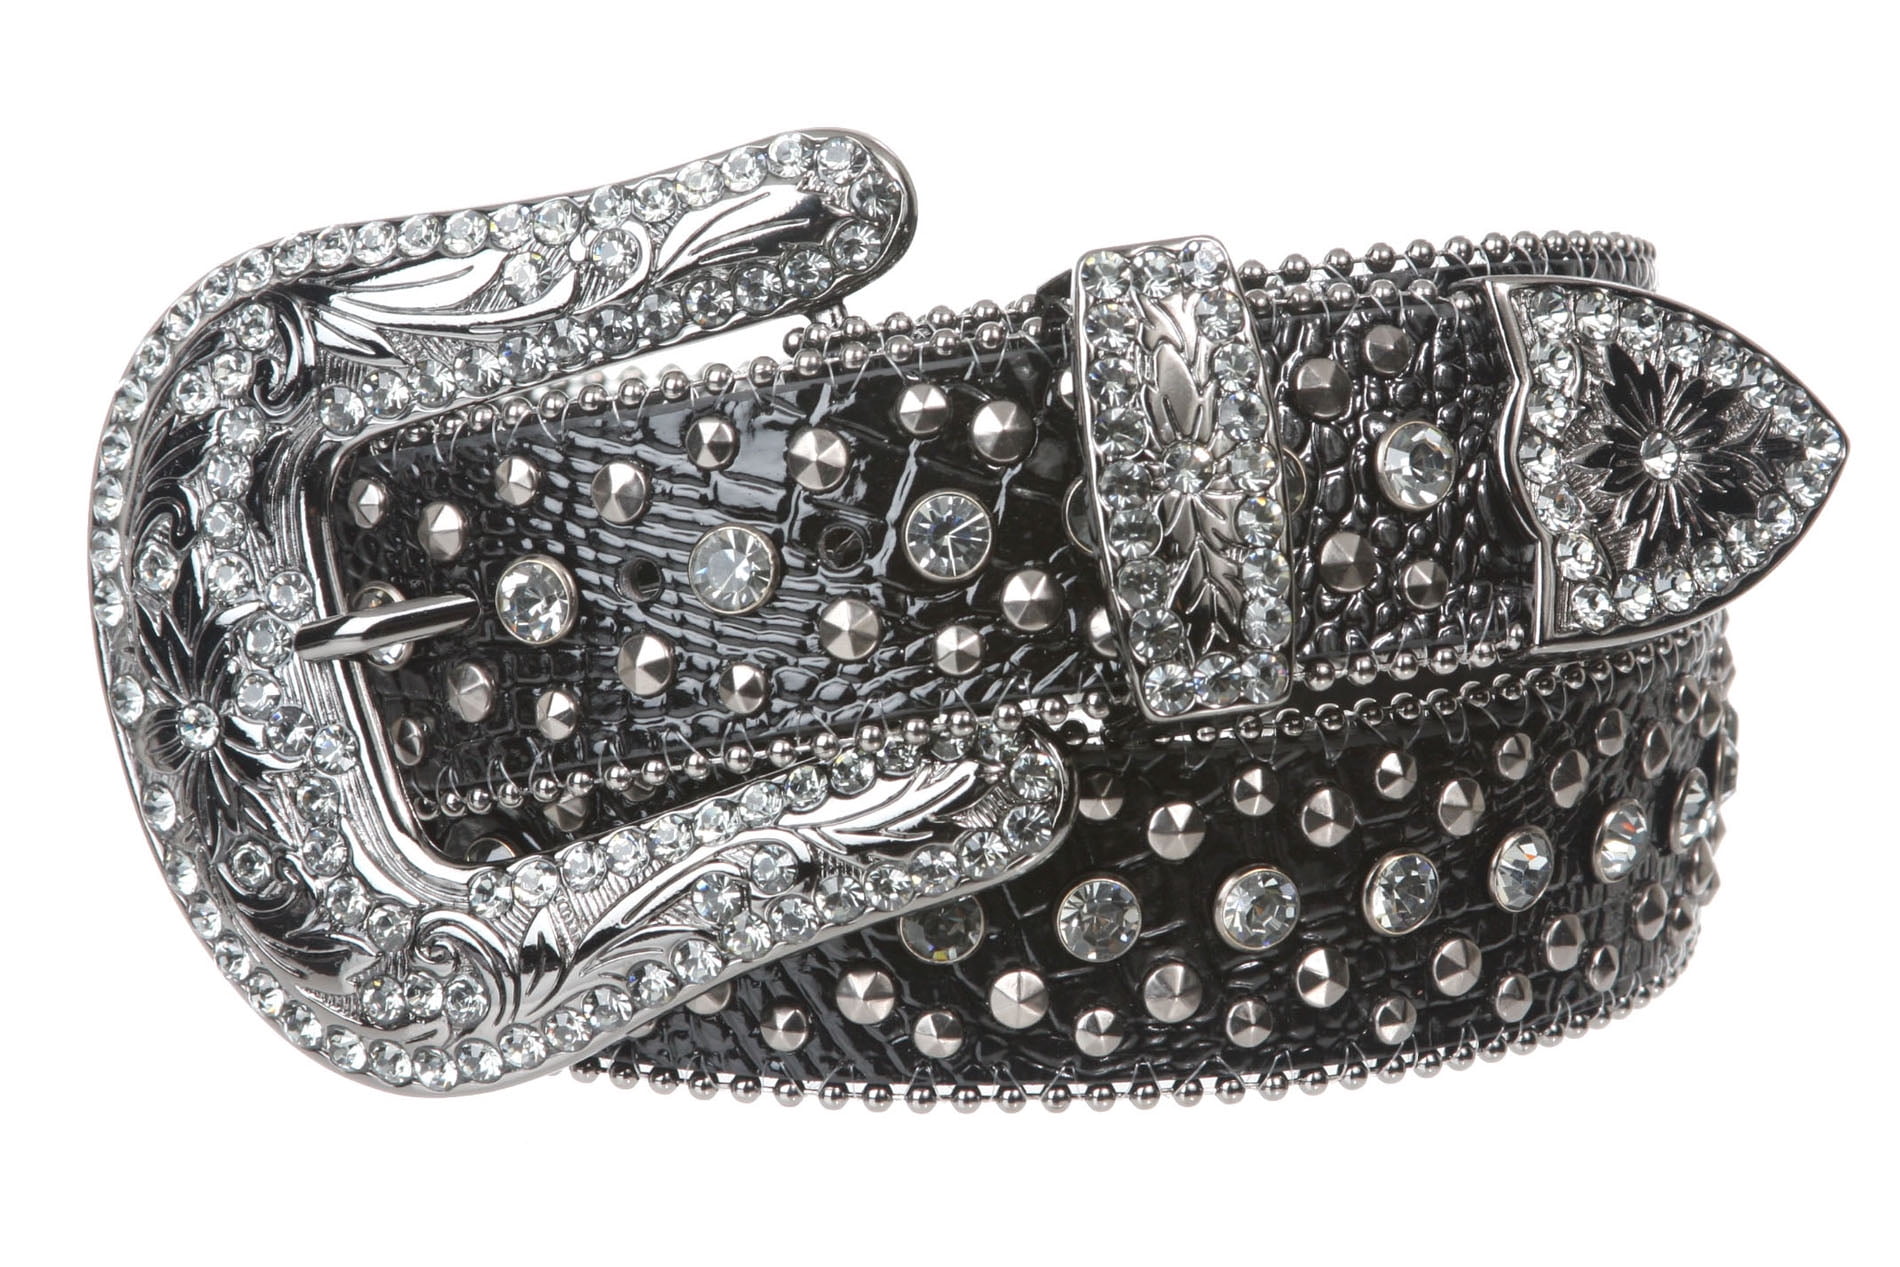 38, Black Western Cowgirl Fleur De Lis Bling Belt with Rhinestone Studded Buckle and Strap